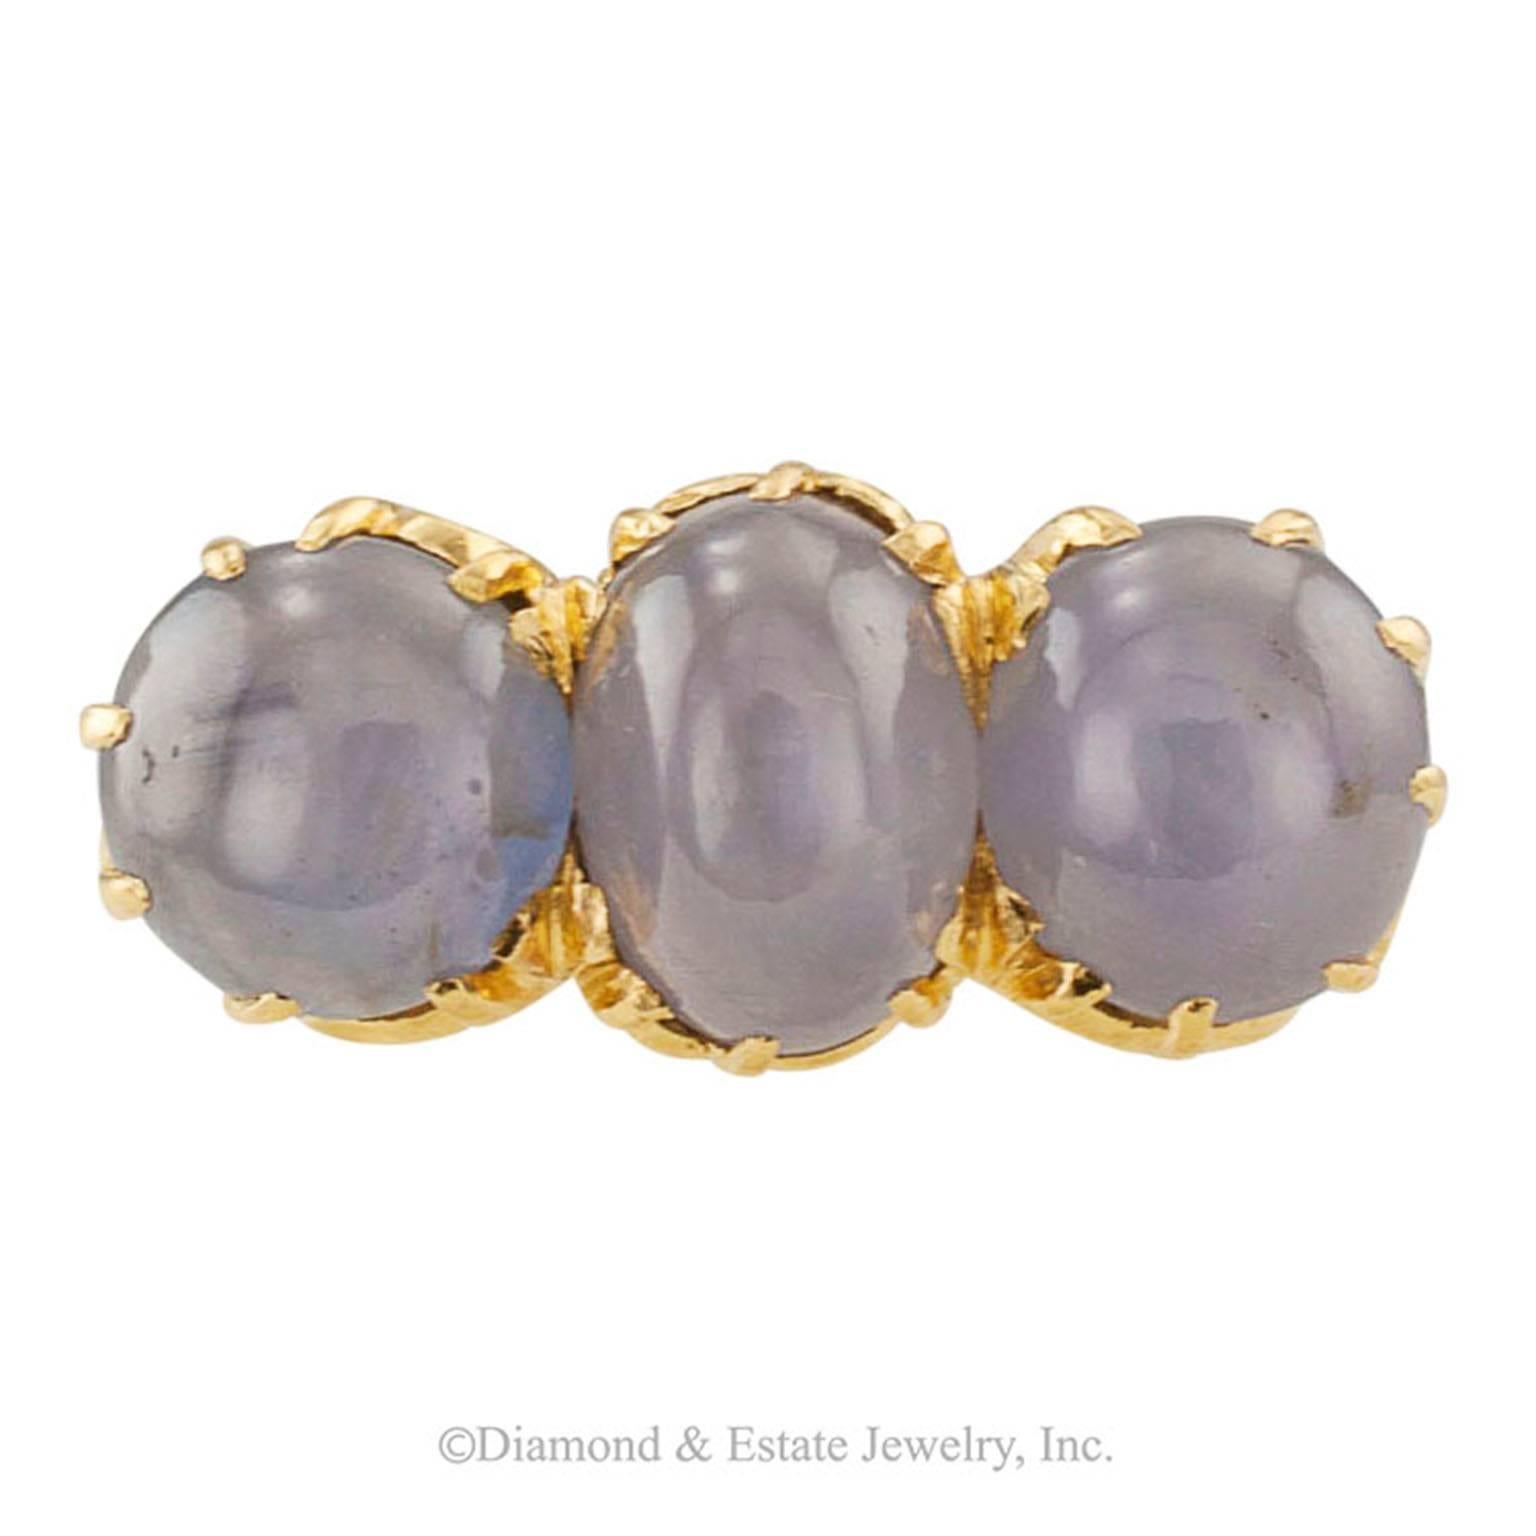 Arts and Crafts Star Sapphire Three-Stone Ring

Arts and Crafts three stone ring featuring a trio of star sapphires totaling approximately 11.50 carats, mounted in 18-karat yellow gold, circa 1900.  The sapphires display strong, well defined